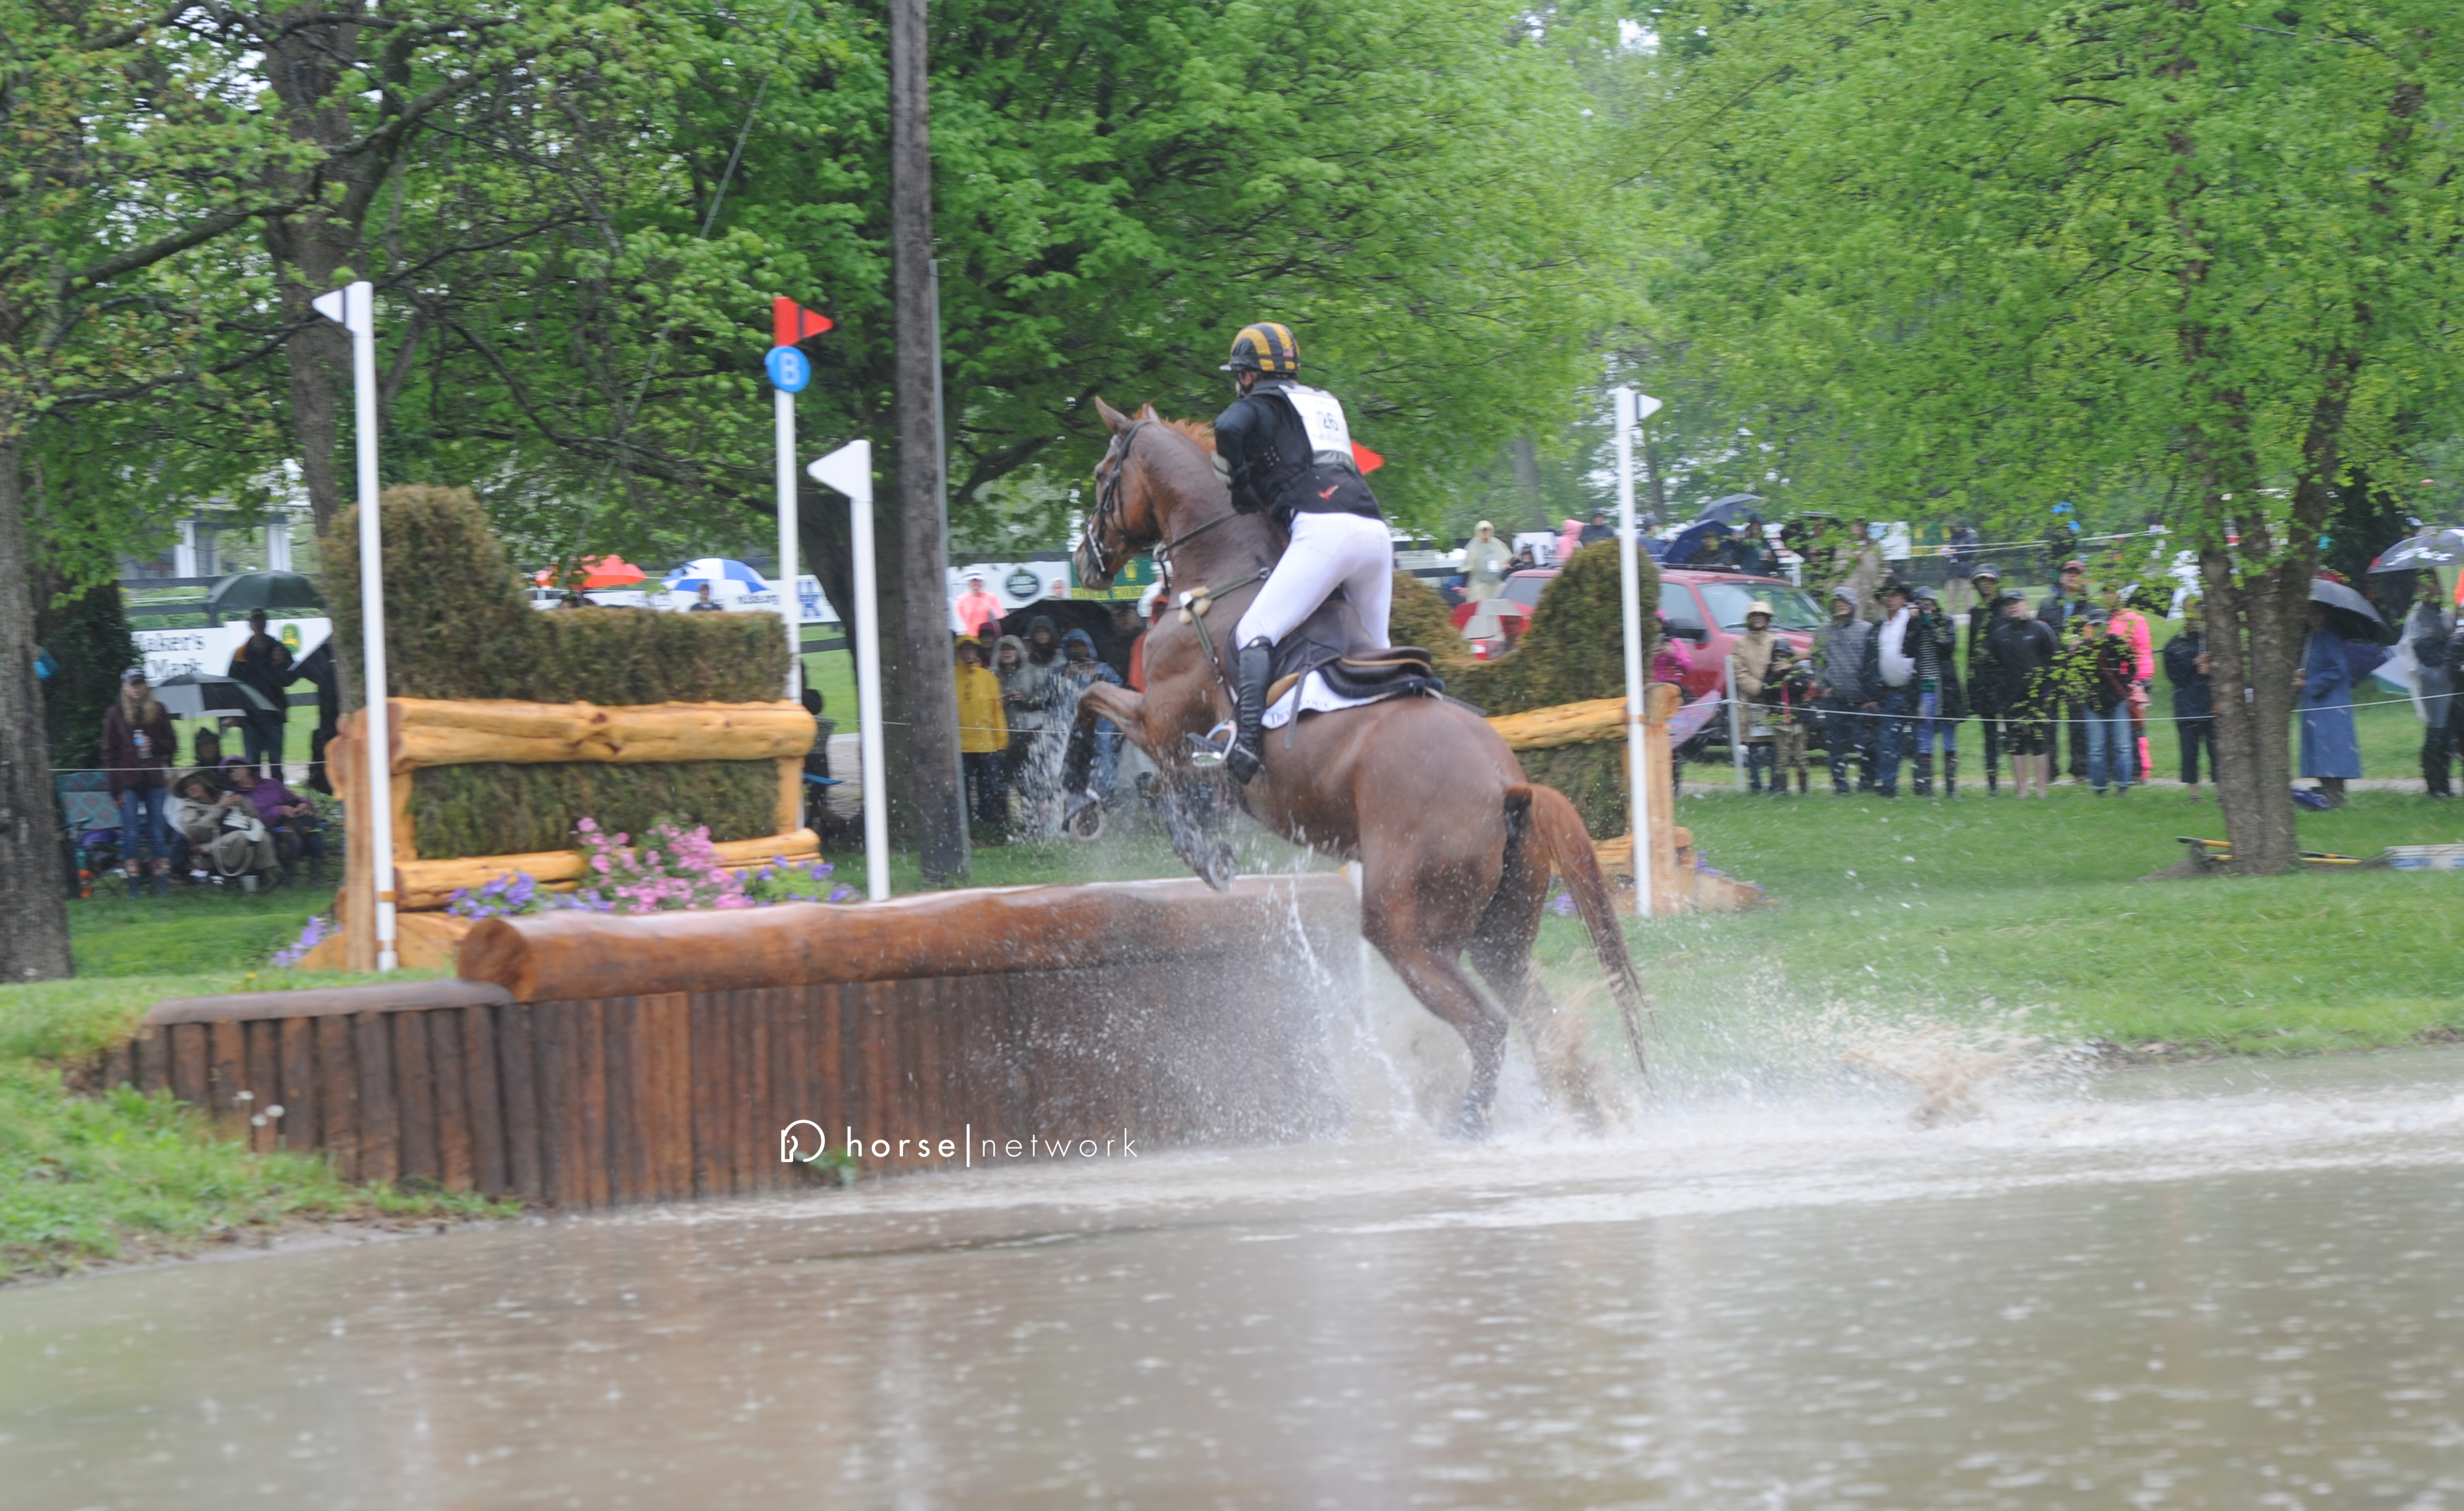 Katie Ruppel and her OTTB Houdini made it to the finish.